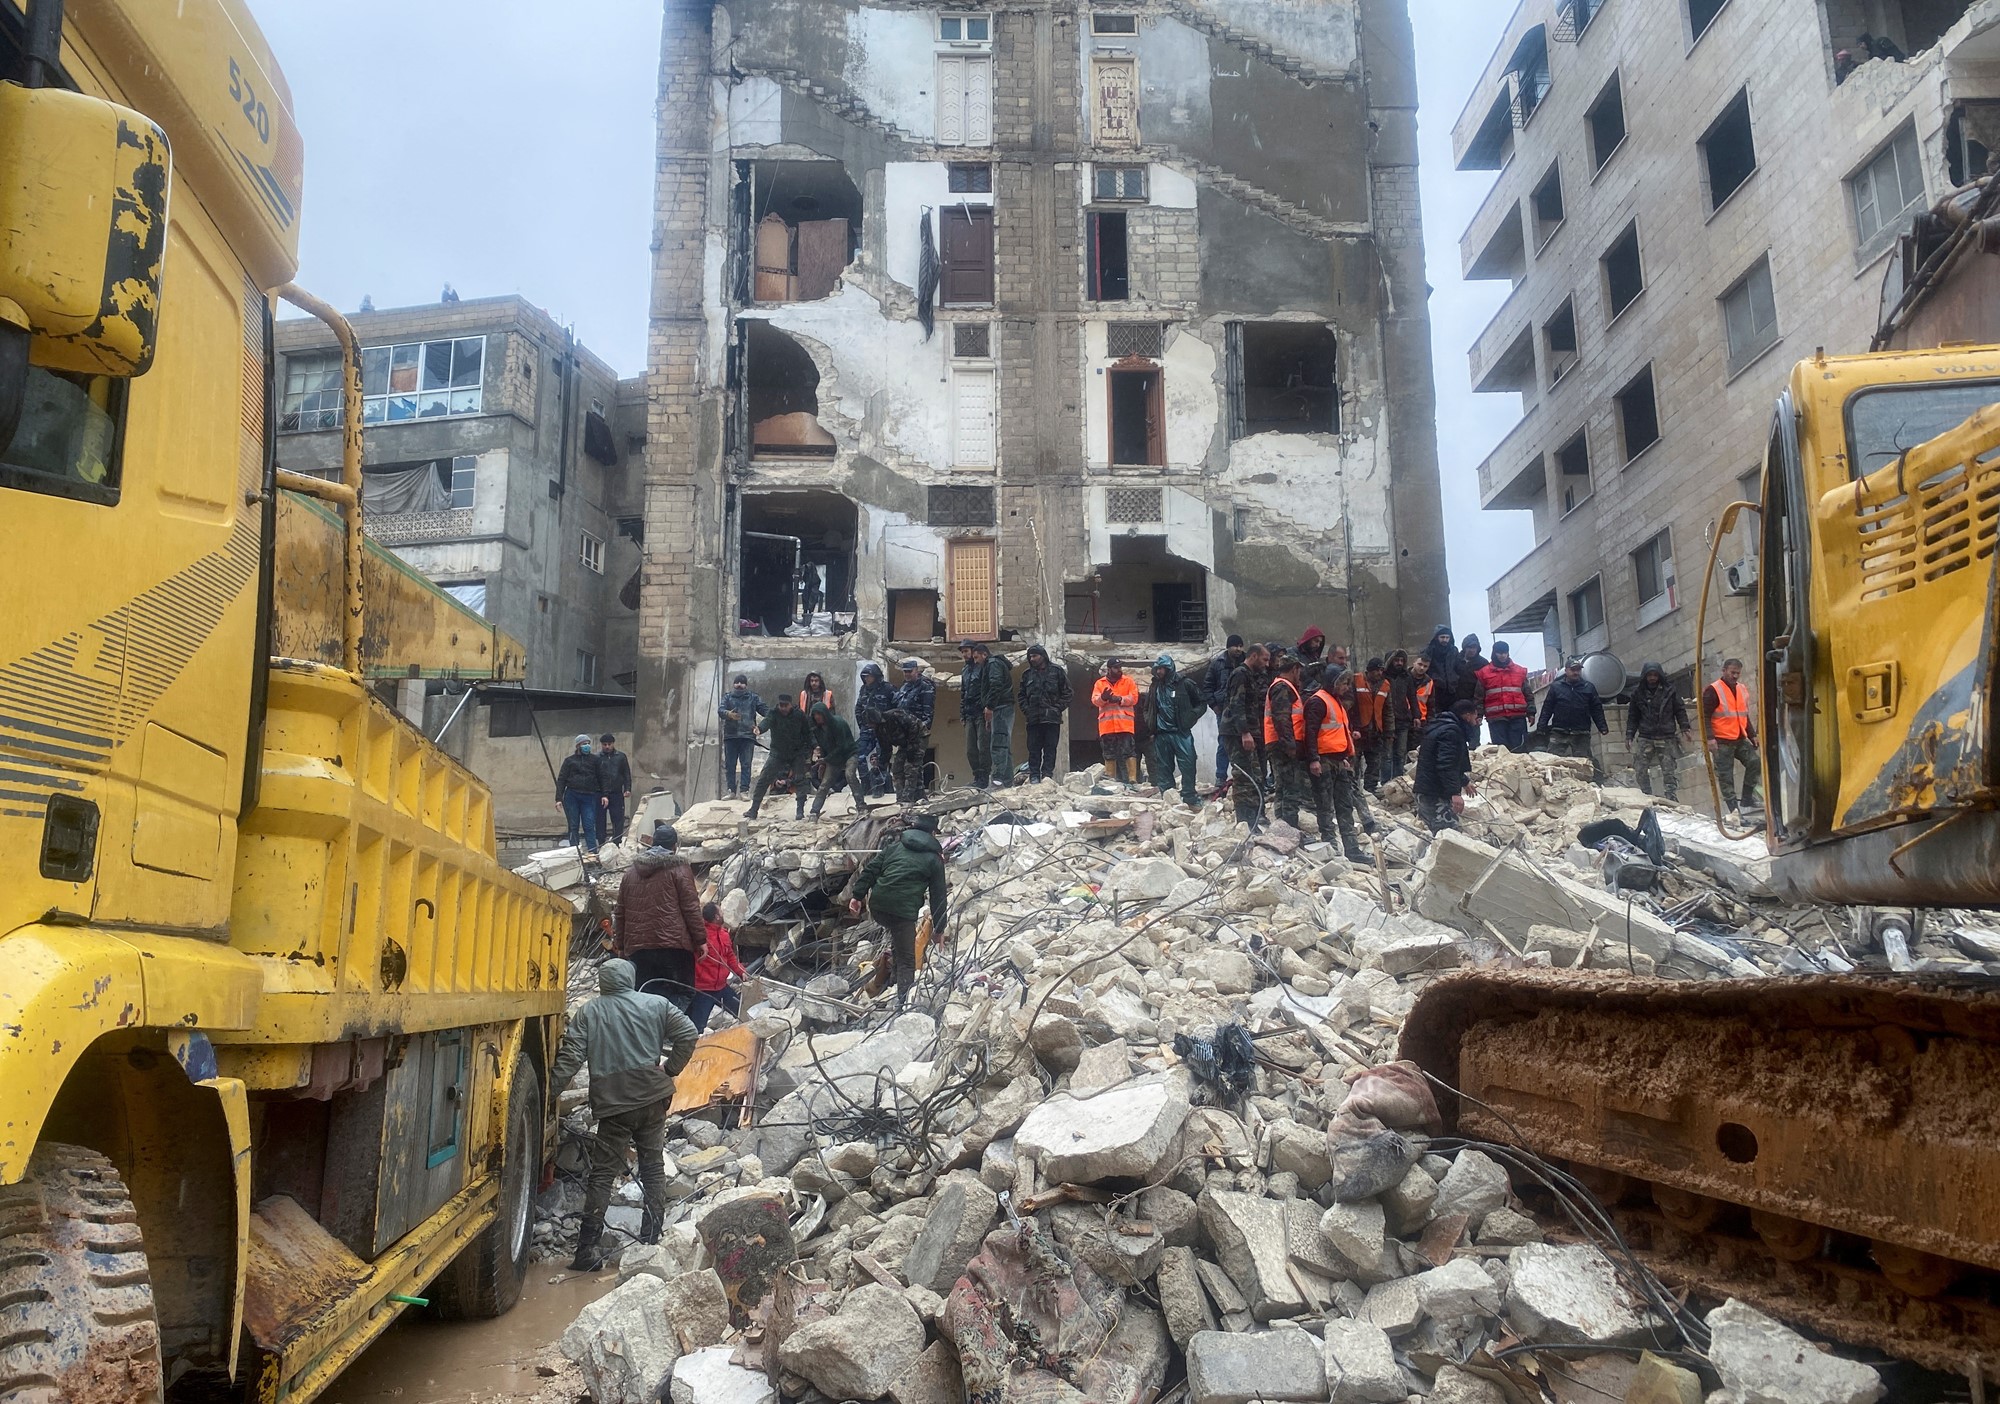 Rescuers search for survivors under the rubble of a collapsed building, following an earthquake, in Hama, Syria